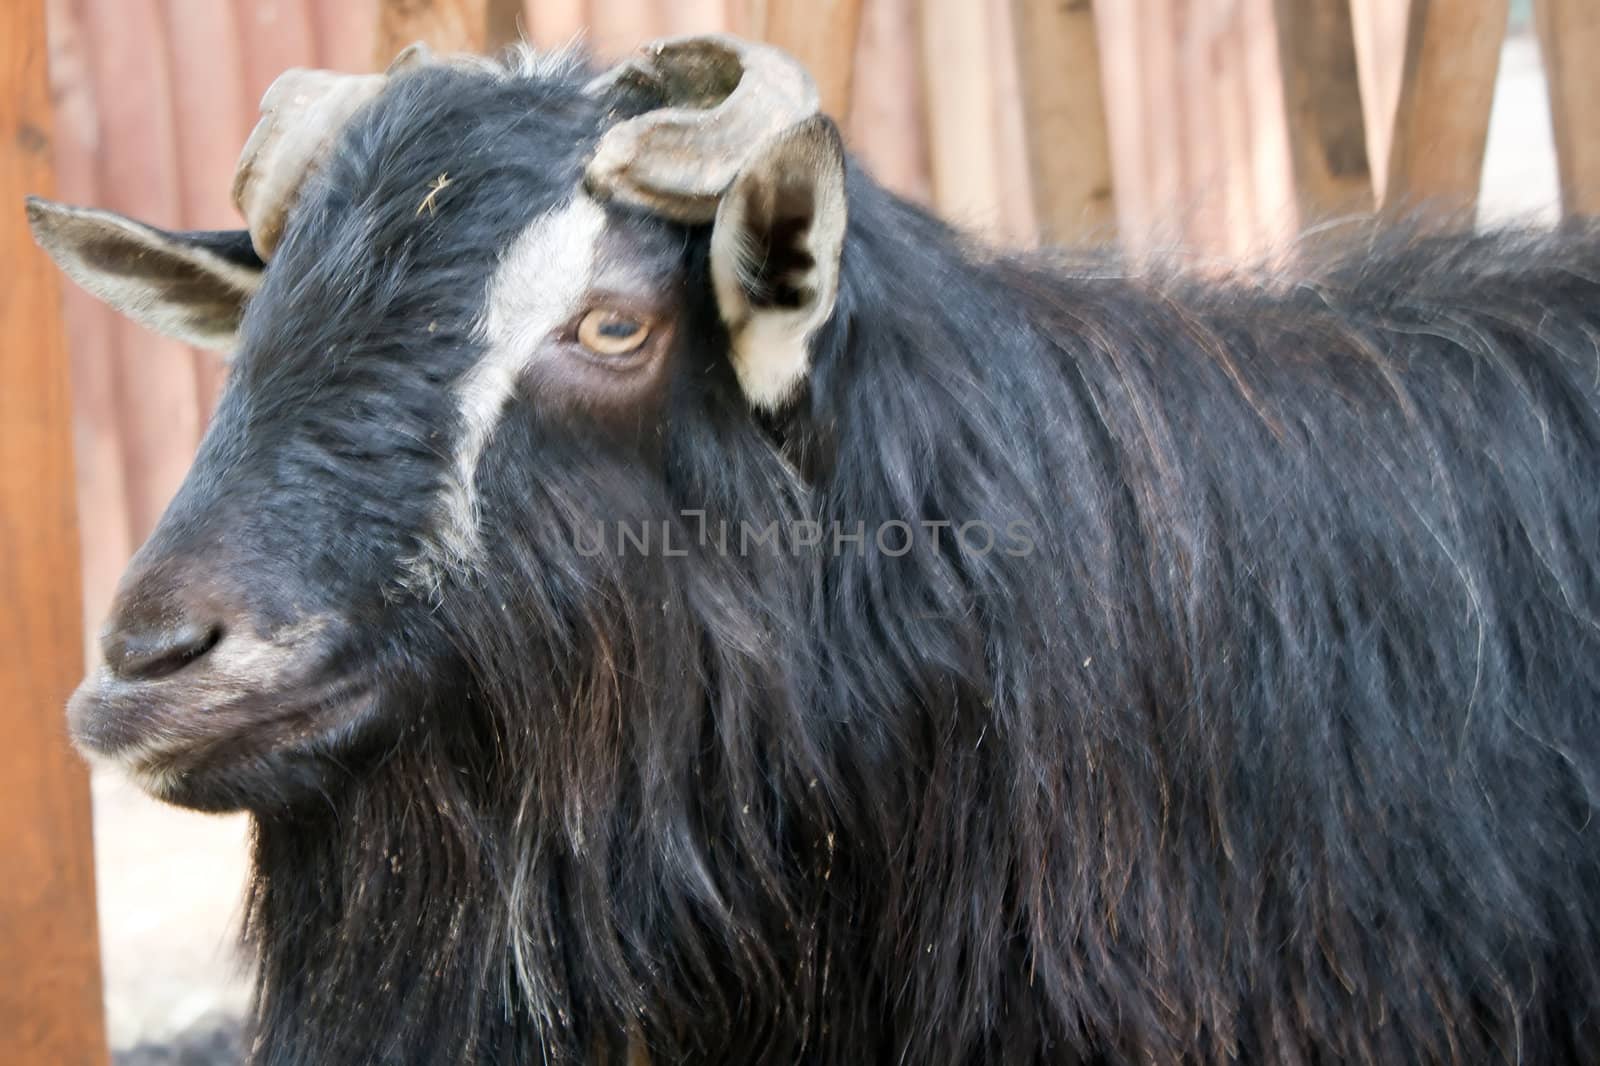 Black Goat of great looks in the frame Shooting at the Zoo